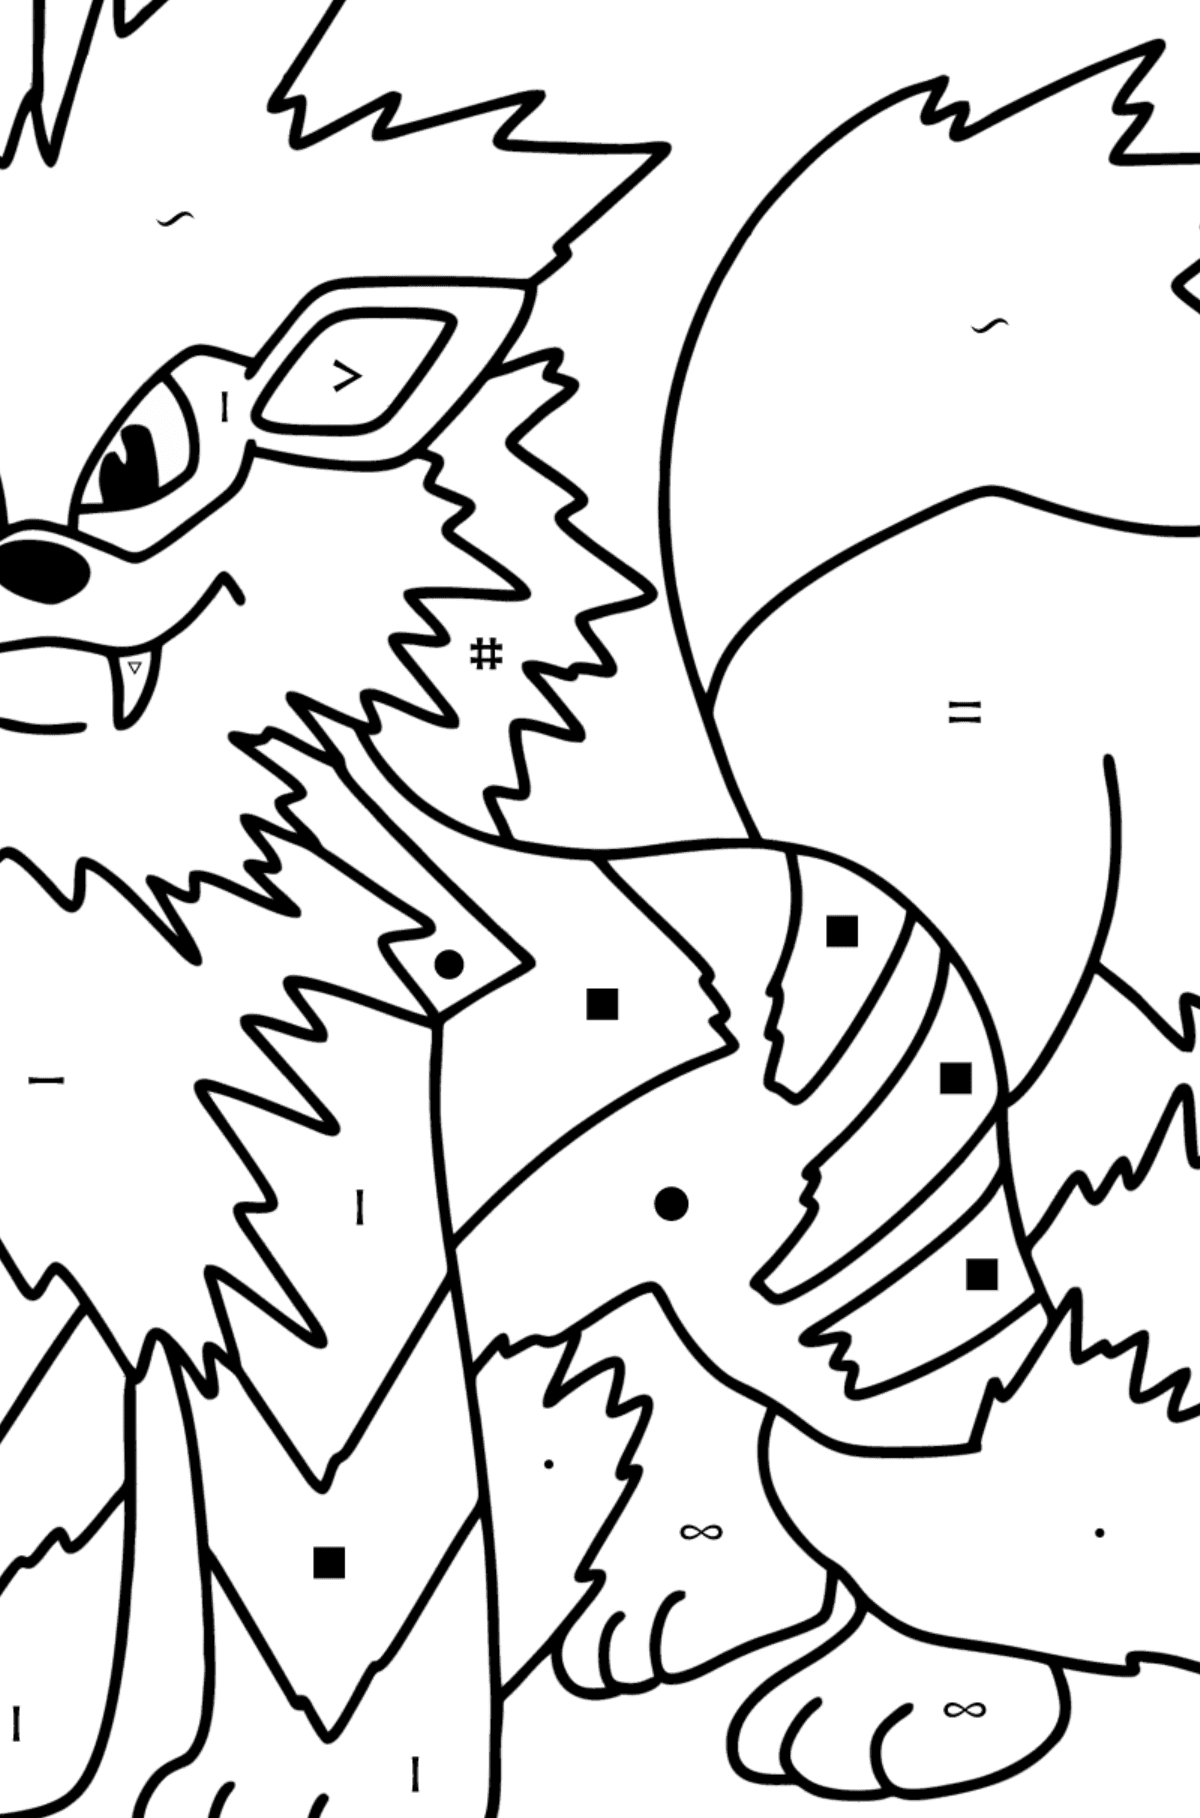 Pokémon Go Arcanine coloring page - Coloring by Symbols for Kids